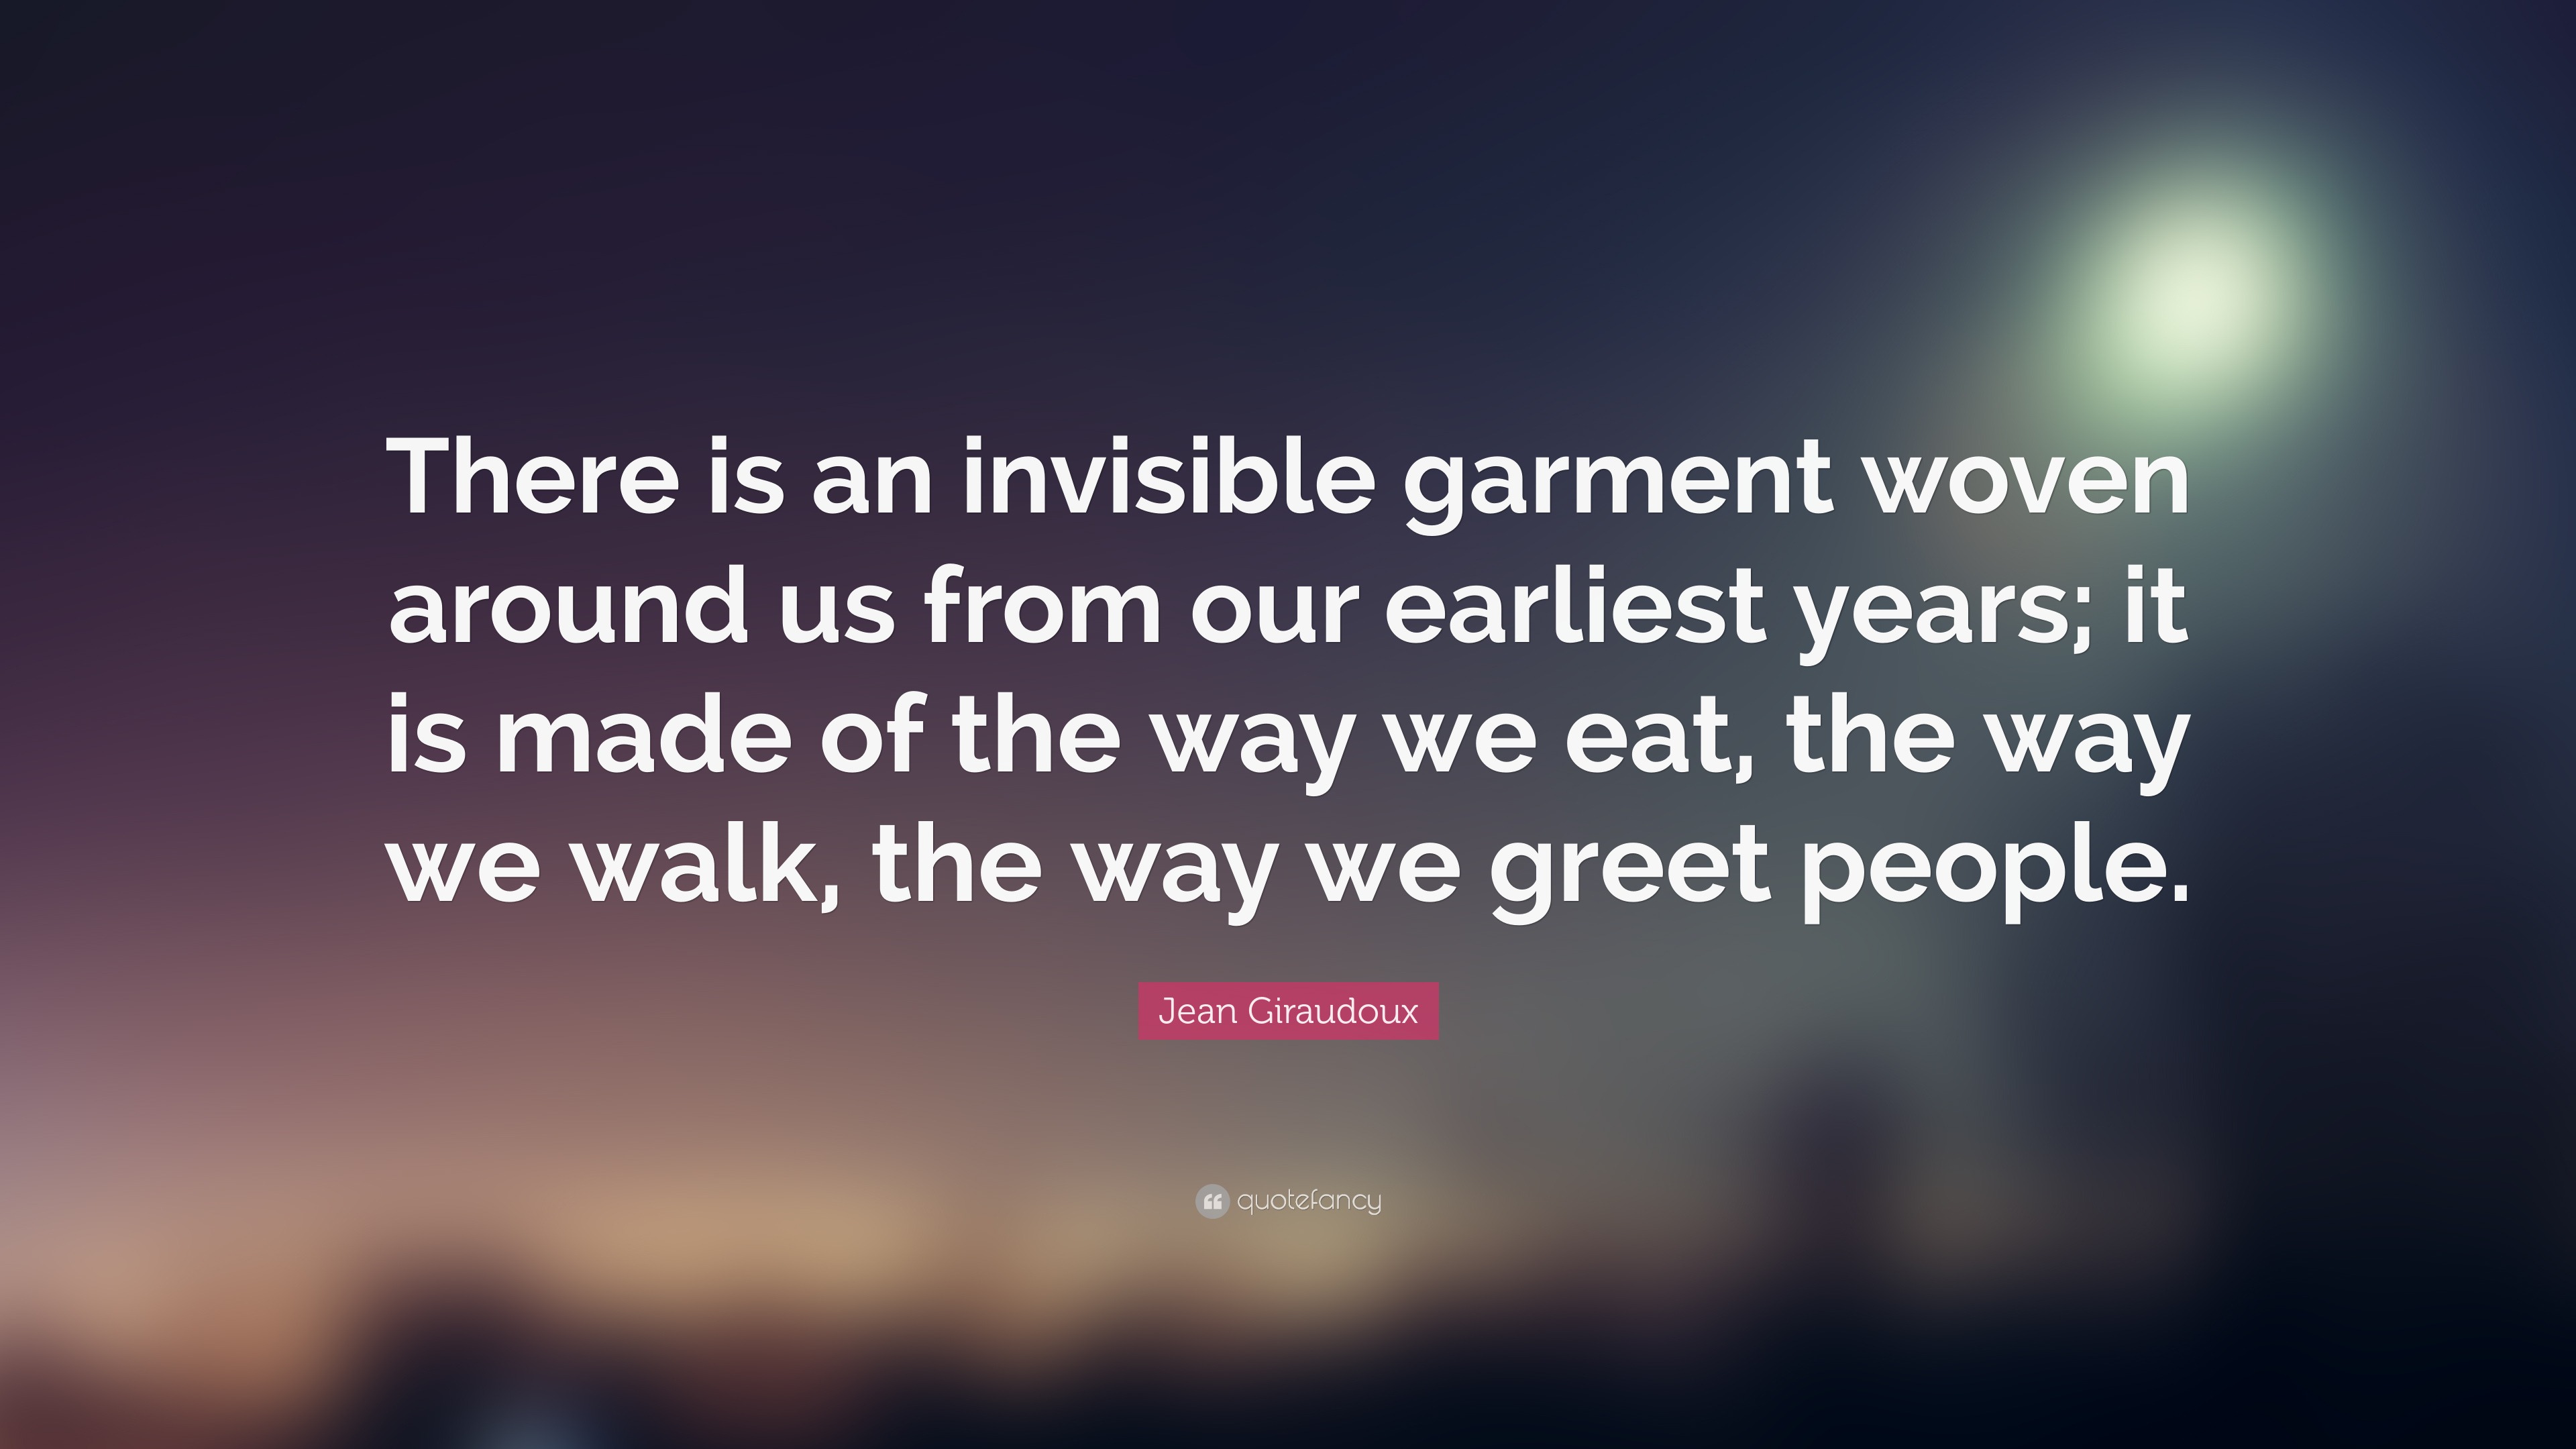 Jean Giraudoux quote: There is an invisible garment woven around